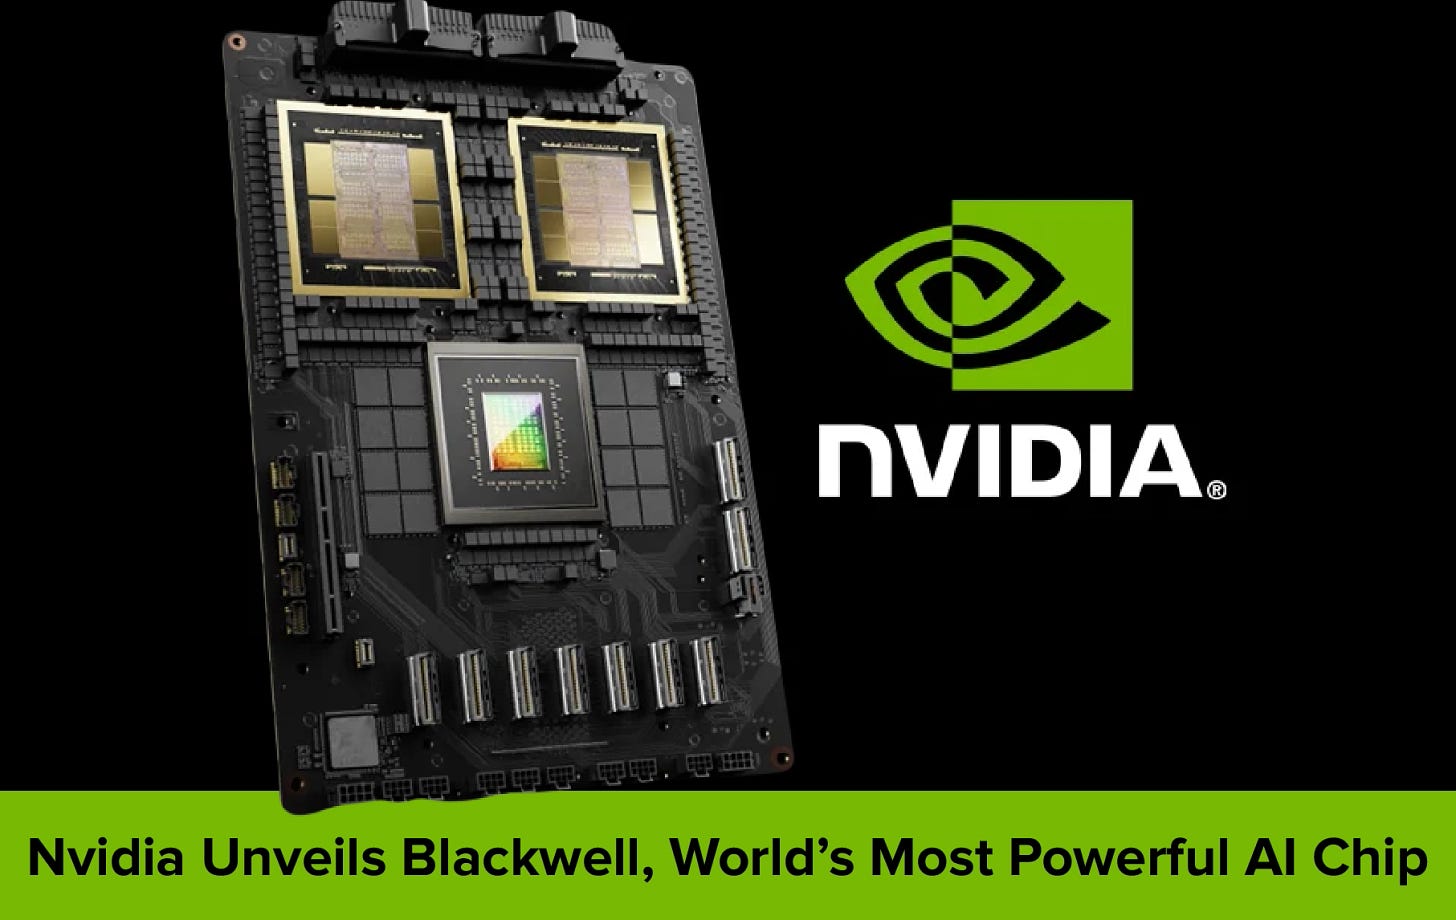 Nvidia Unveils Blackwell, World's Most Powerful AI